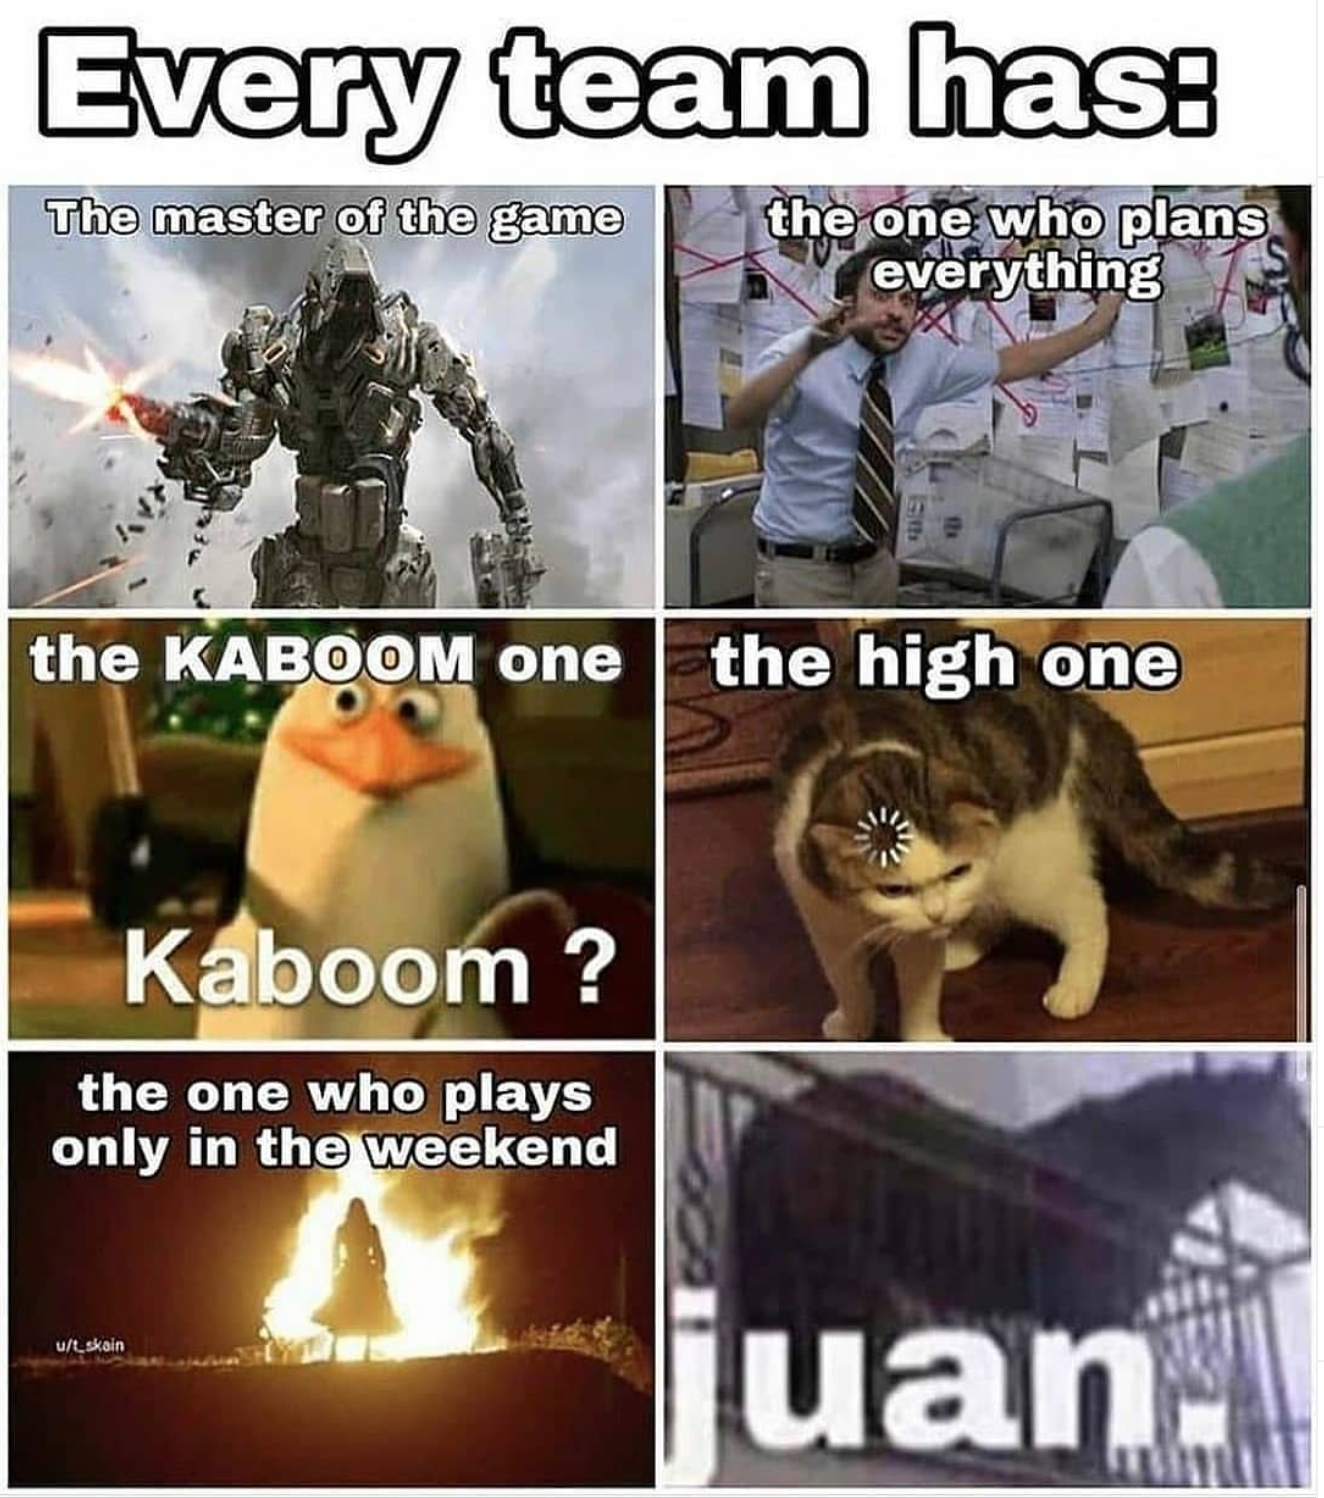 funny gaming memes  - juan horse on balcony meme - Every team has The master of the game the one who plans everything the Kaboom one the high one Kaboom ? the one who plays only in the weekend juan.